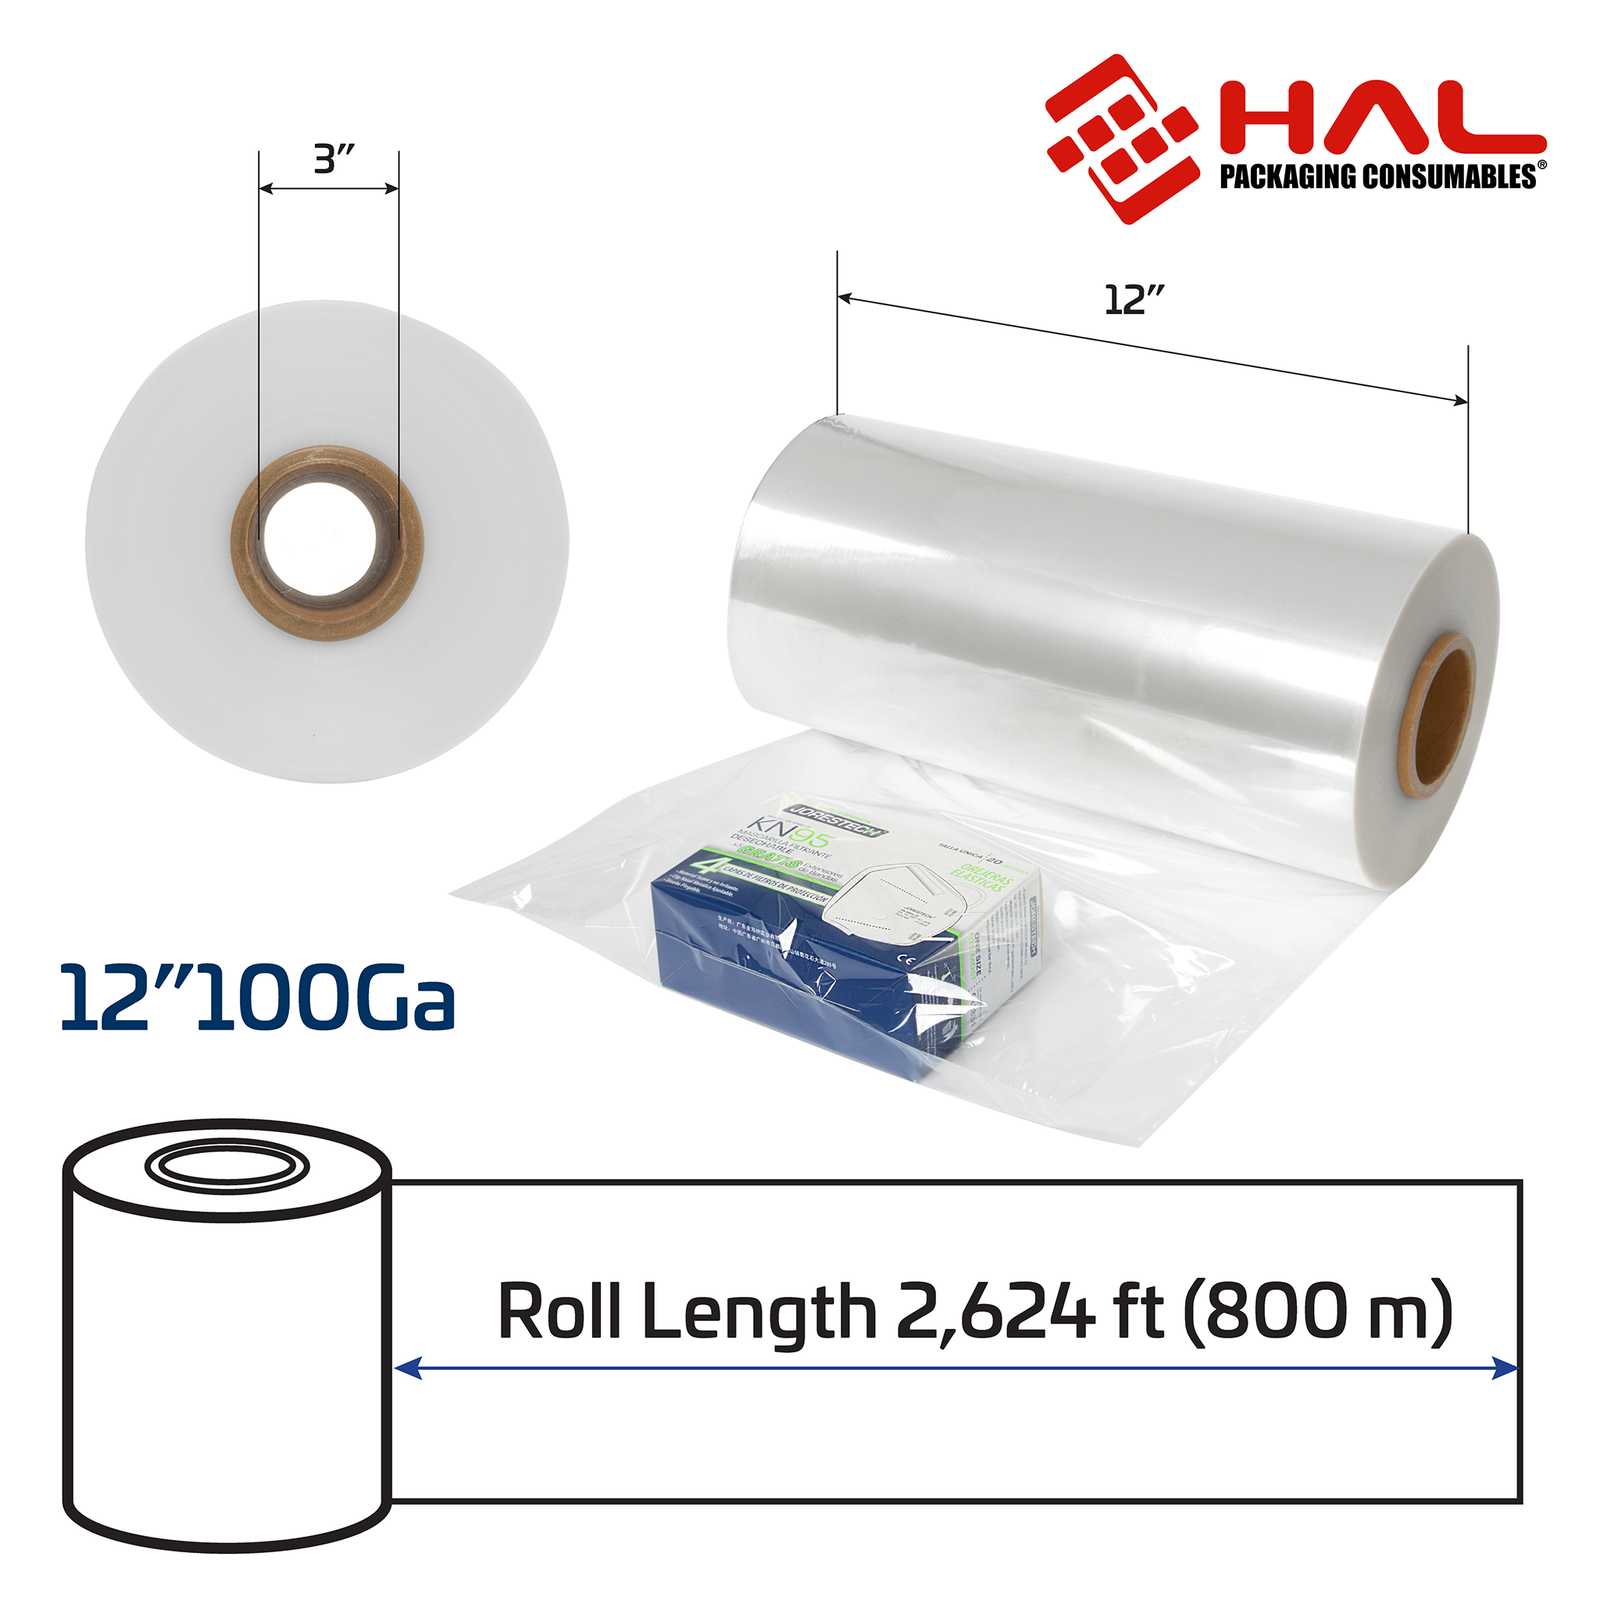 Measurements of the 100 gauge shrink wrapping film tube. 3 inch diameter of the inner core, and 12 inch width with a 2,624 ft. length (800 meters).